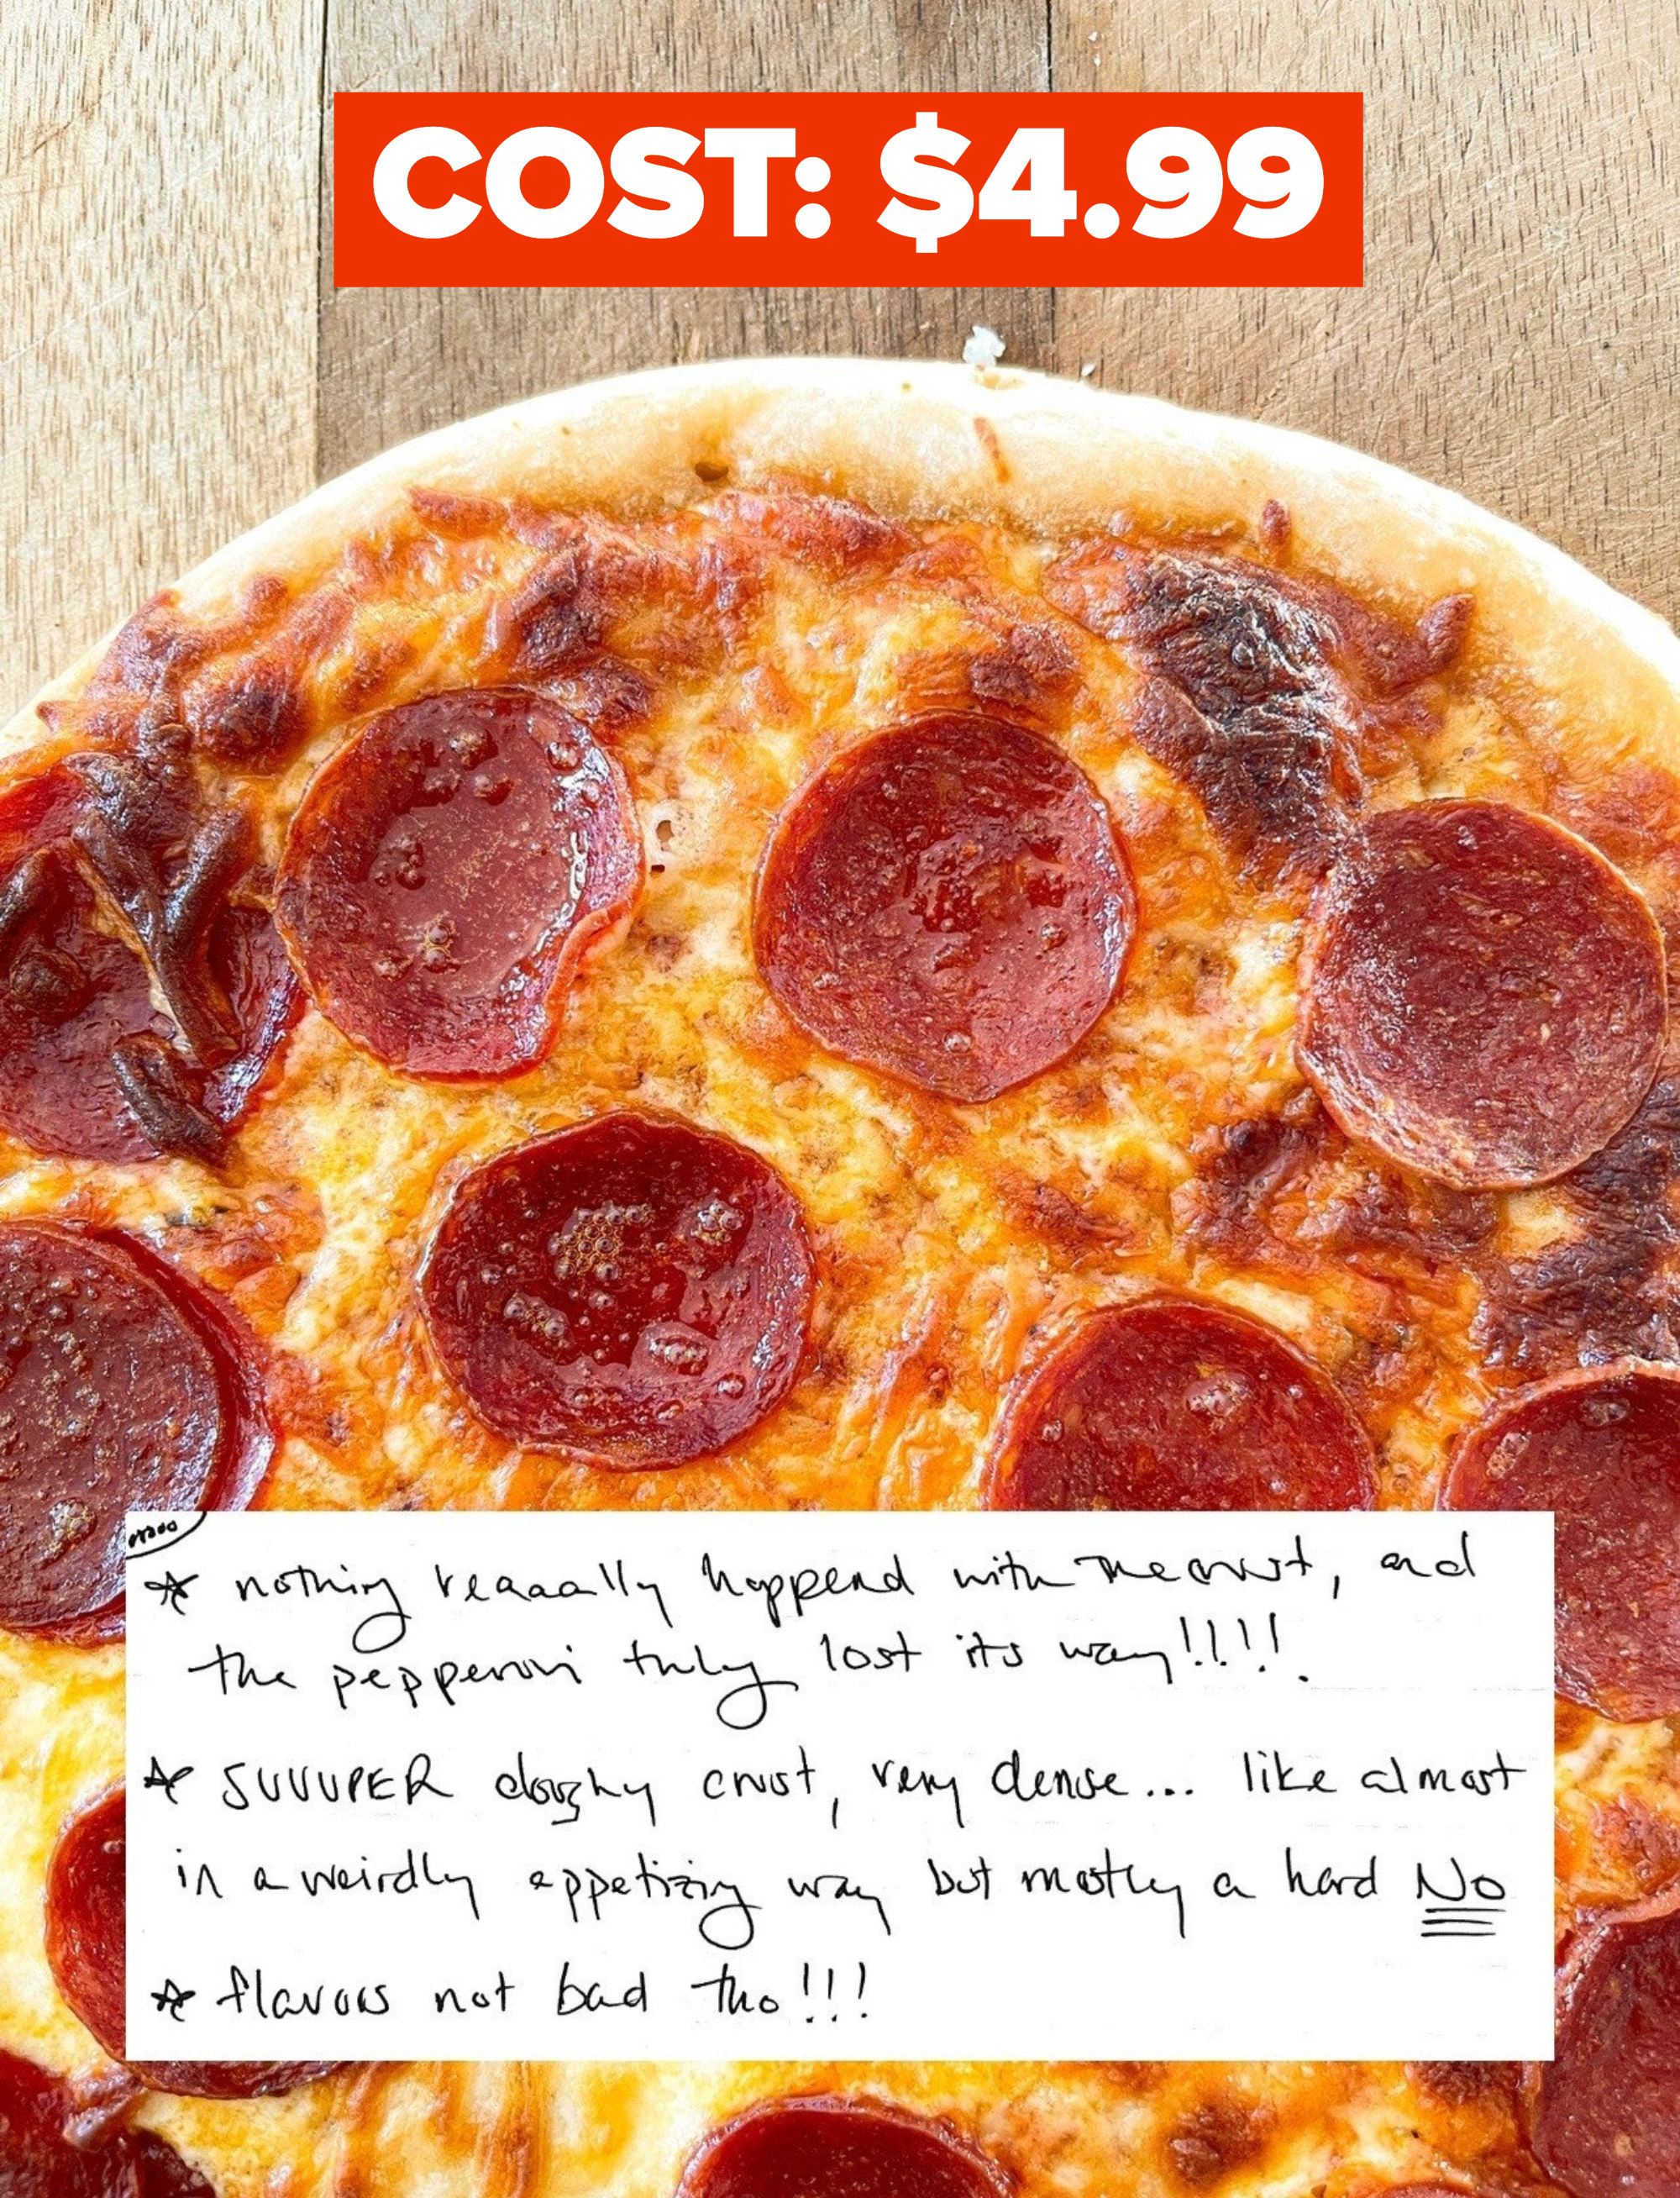 Whole Foods Pizza that cost $4.99 with author&#x27;s handwritten notes overlayed